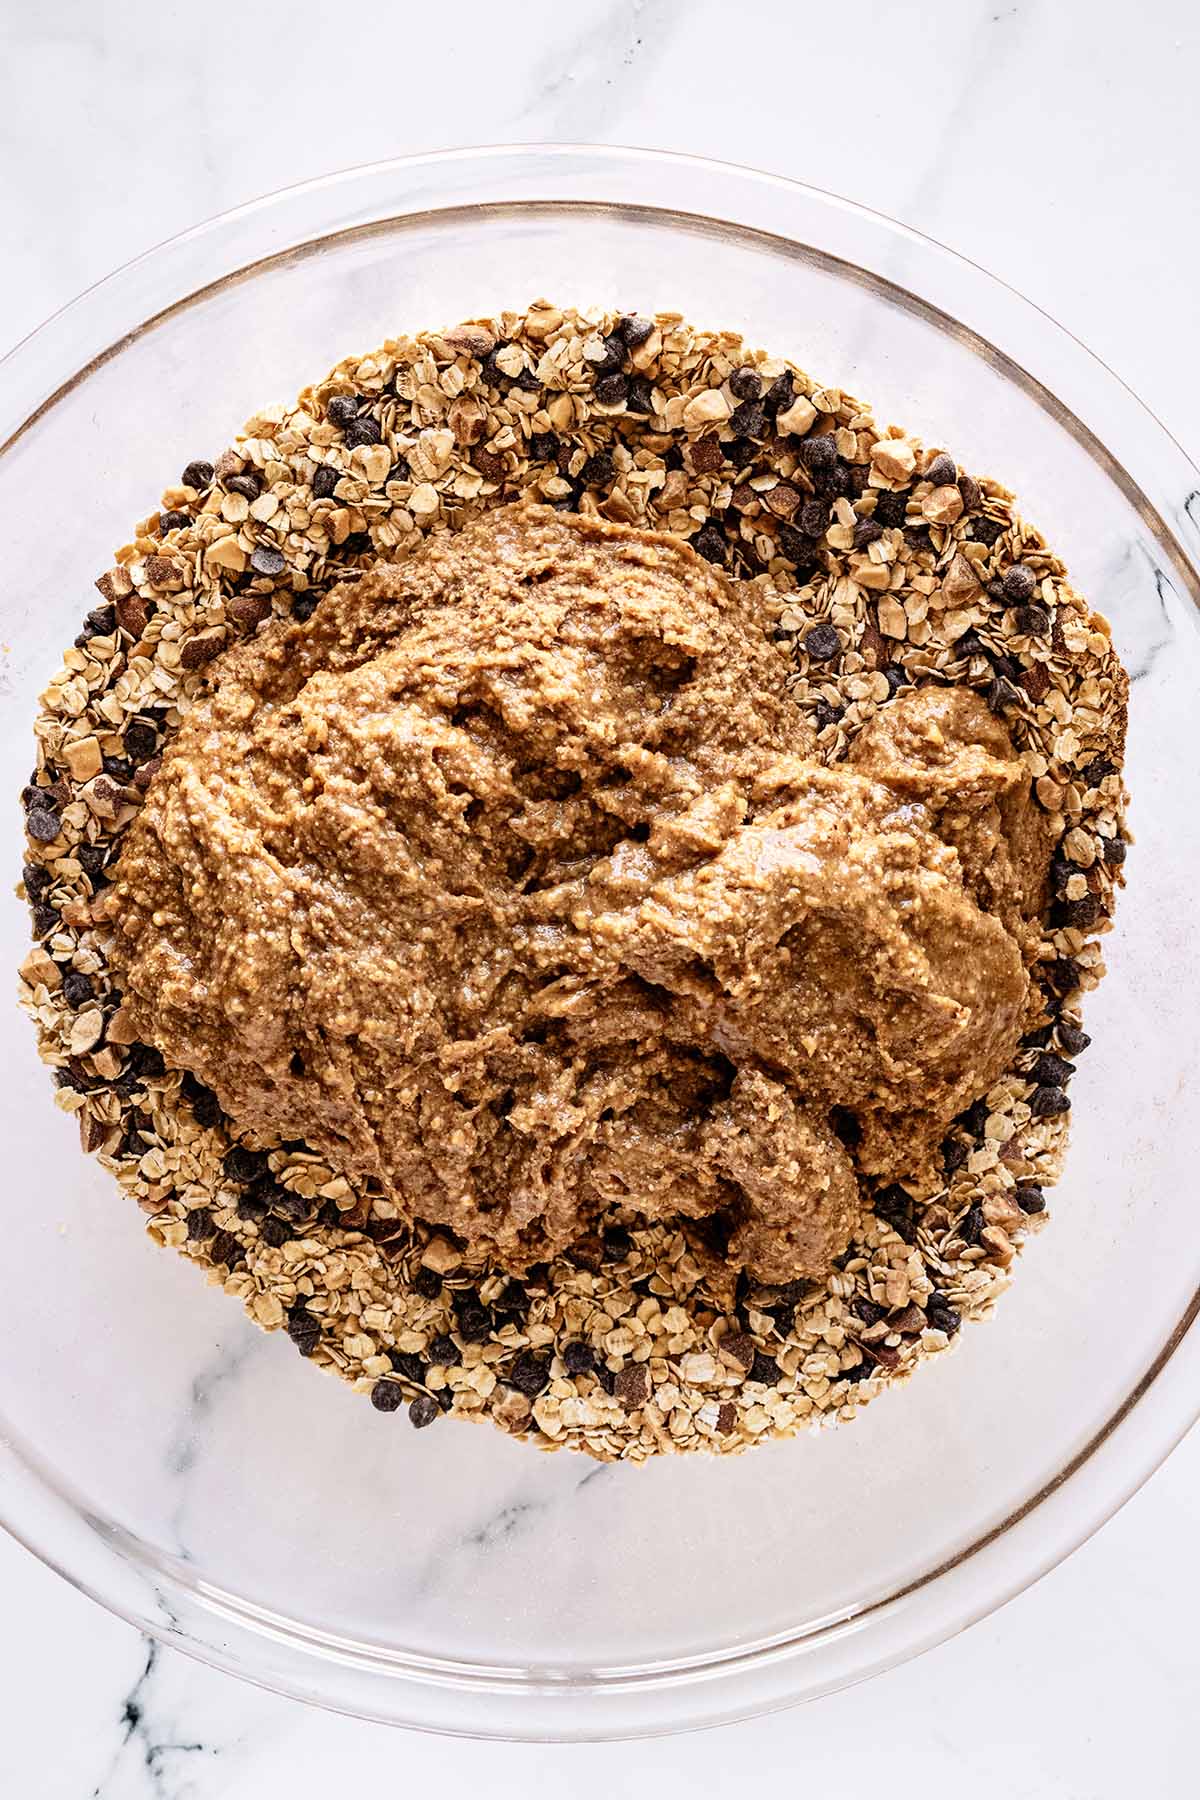 Peanut butter mixture in a glass bowl with oat mixture